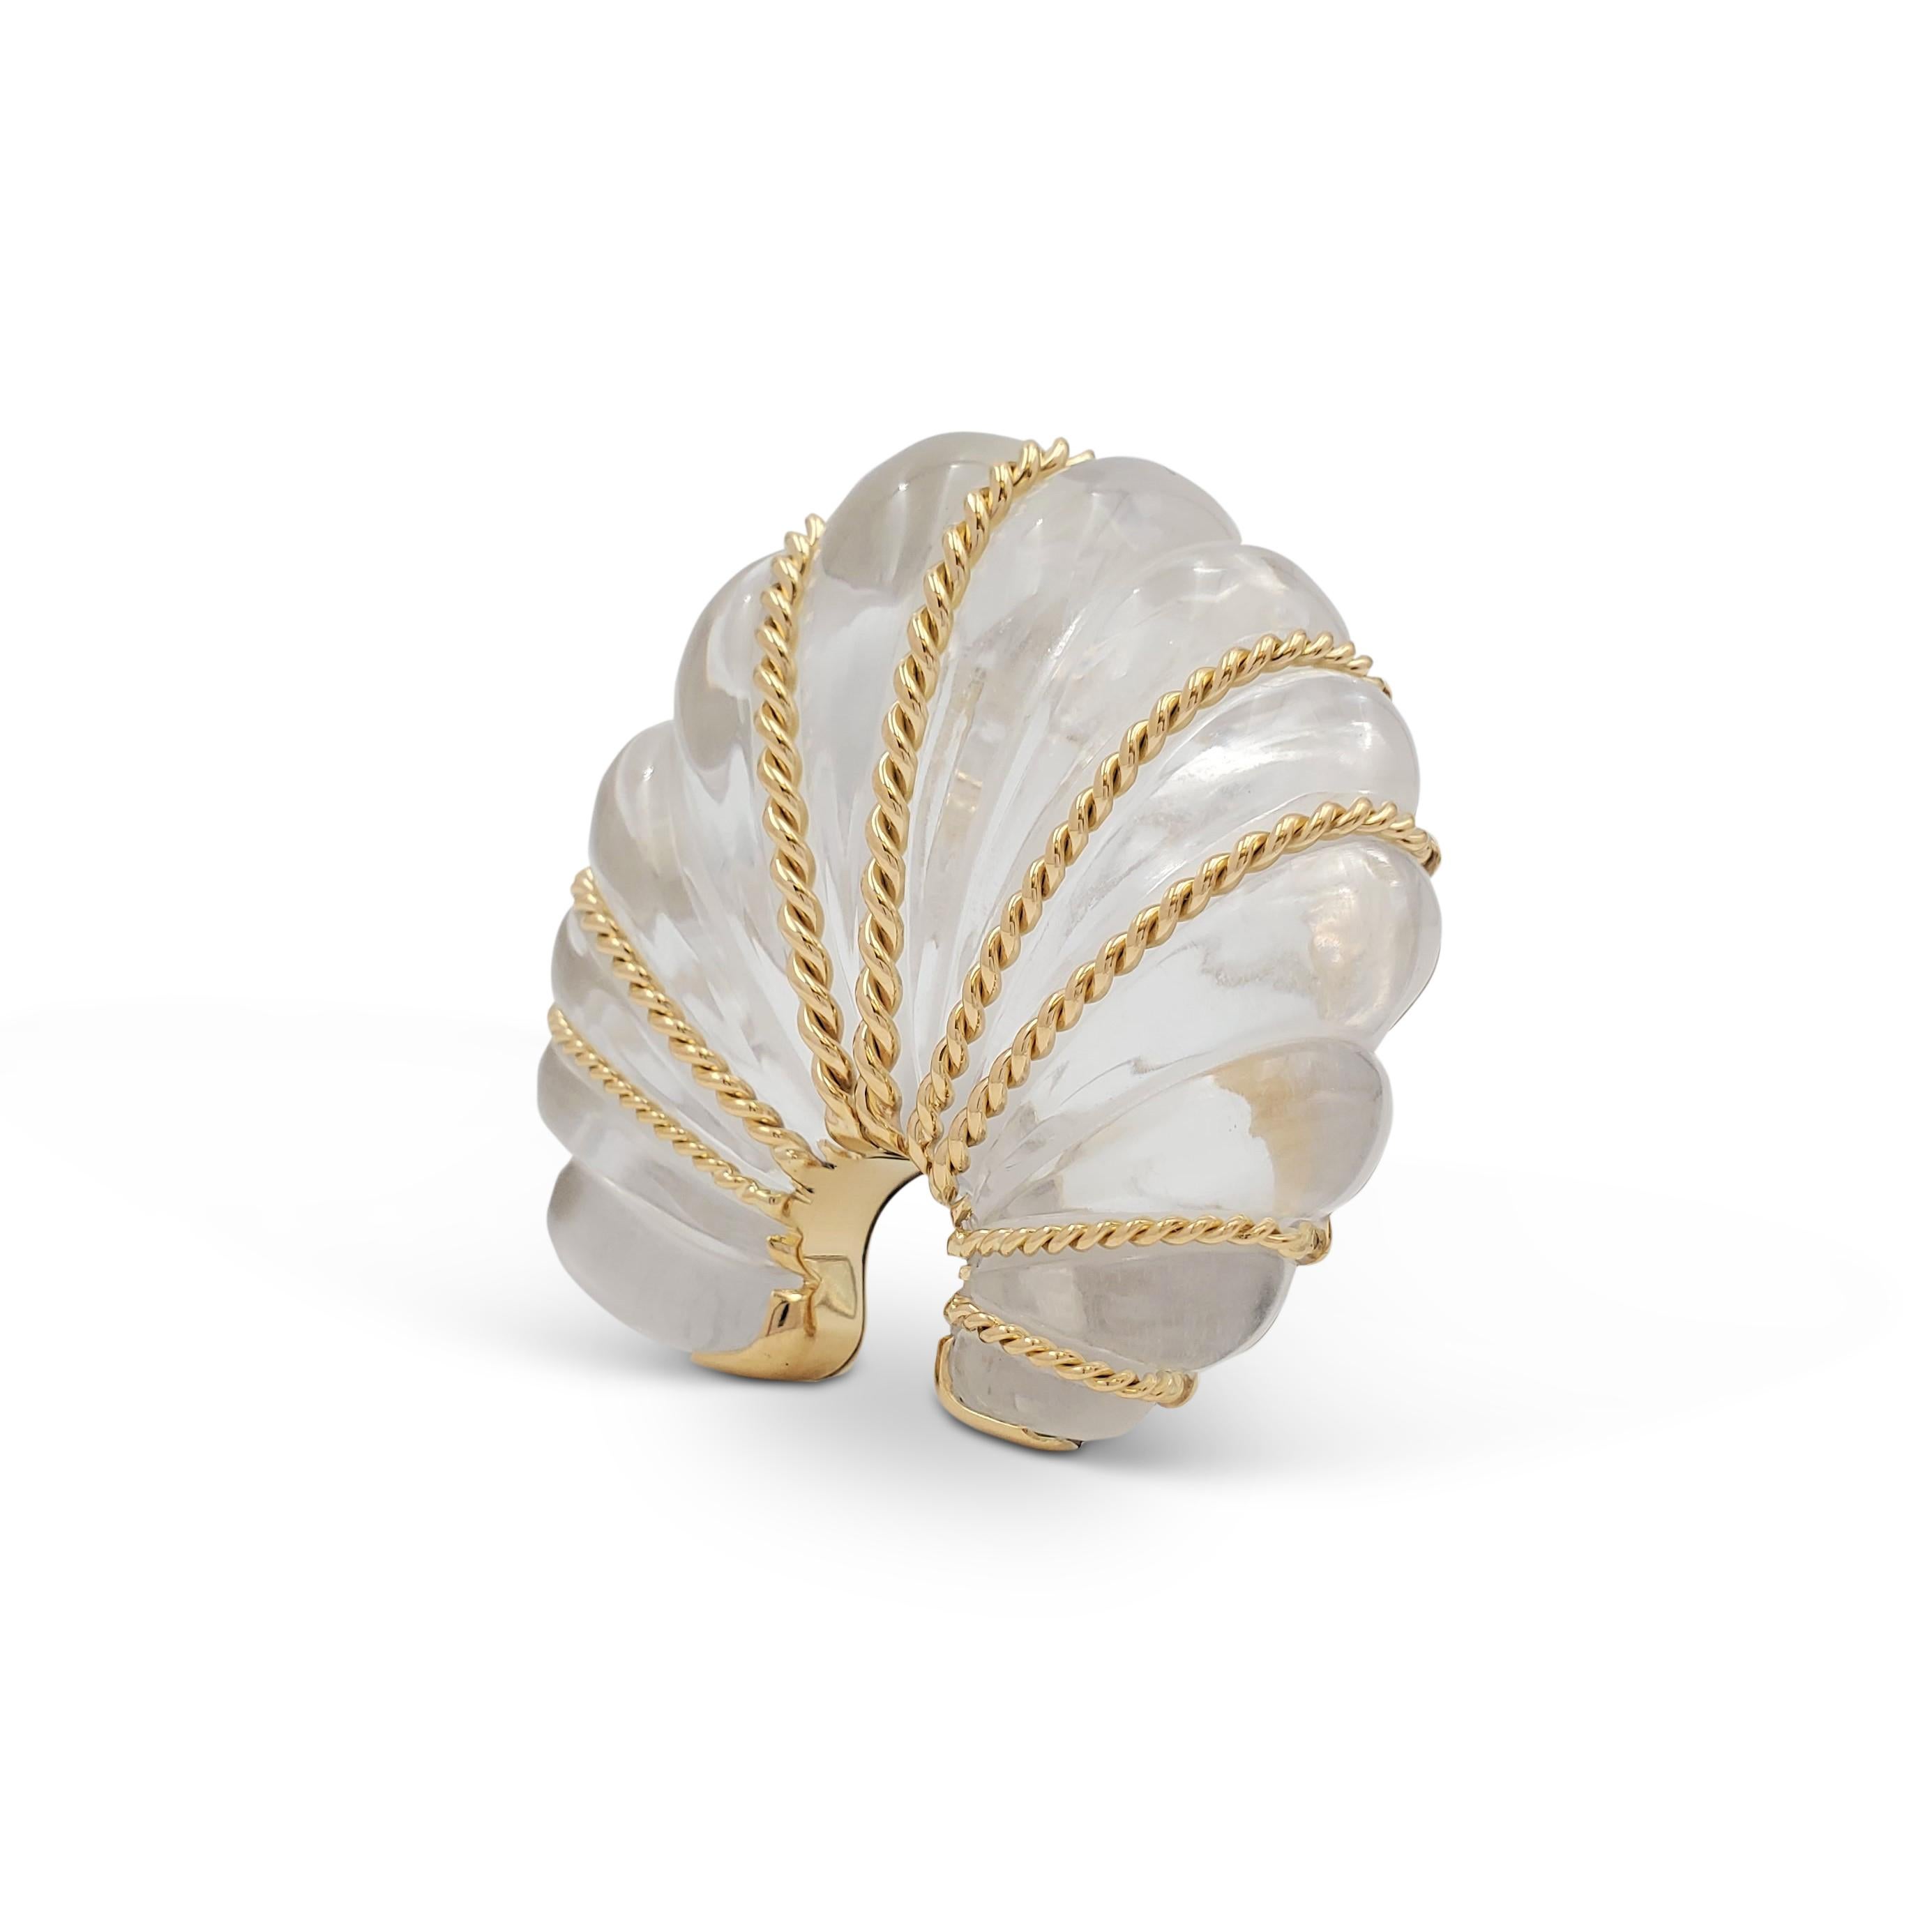 Authentic Seaman Schepps brooch centering on a fluted clear crystal fan design with 18 karat yellow twisted wires. The rock crystal is set in 18 karat yellow gold. Signed Seaman Schepps, 750, with serial number. The brooch is not presented with the